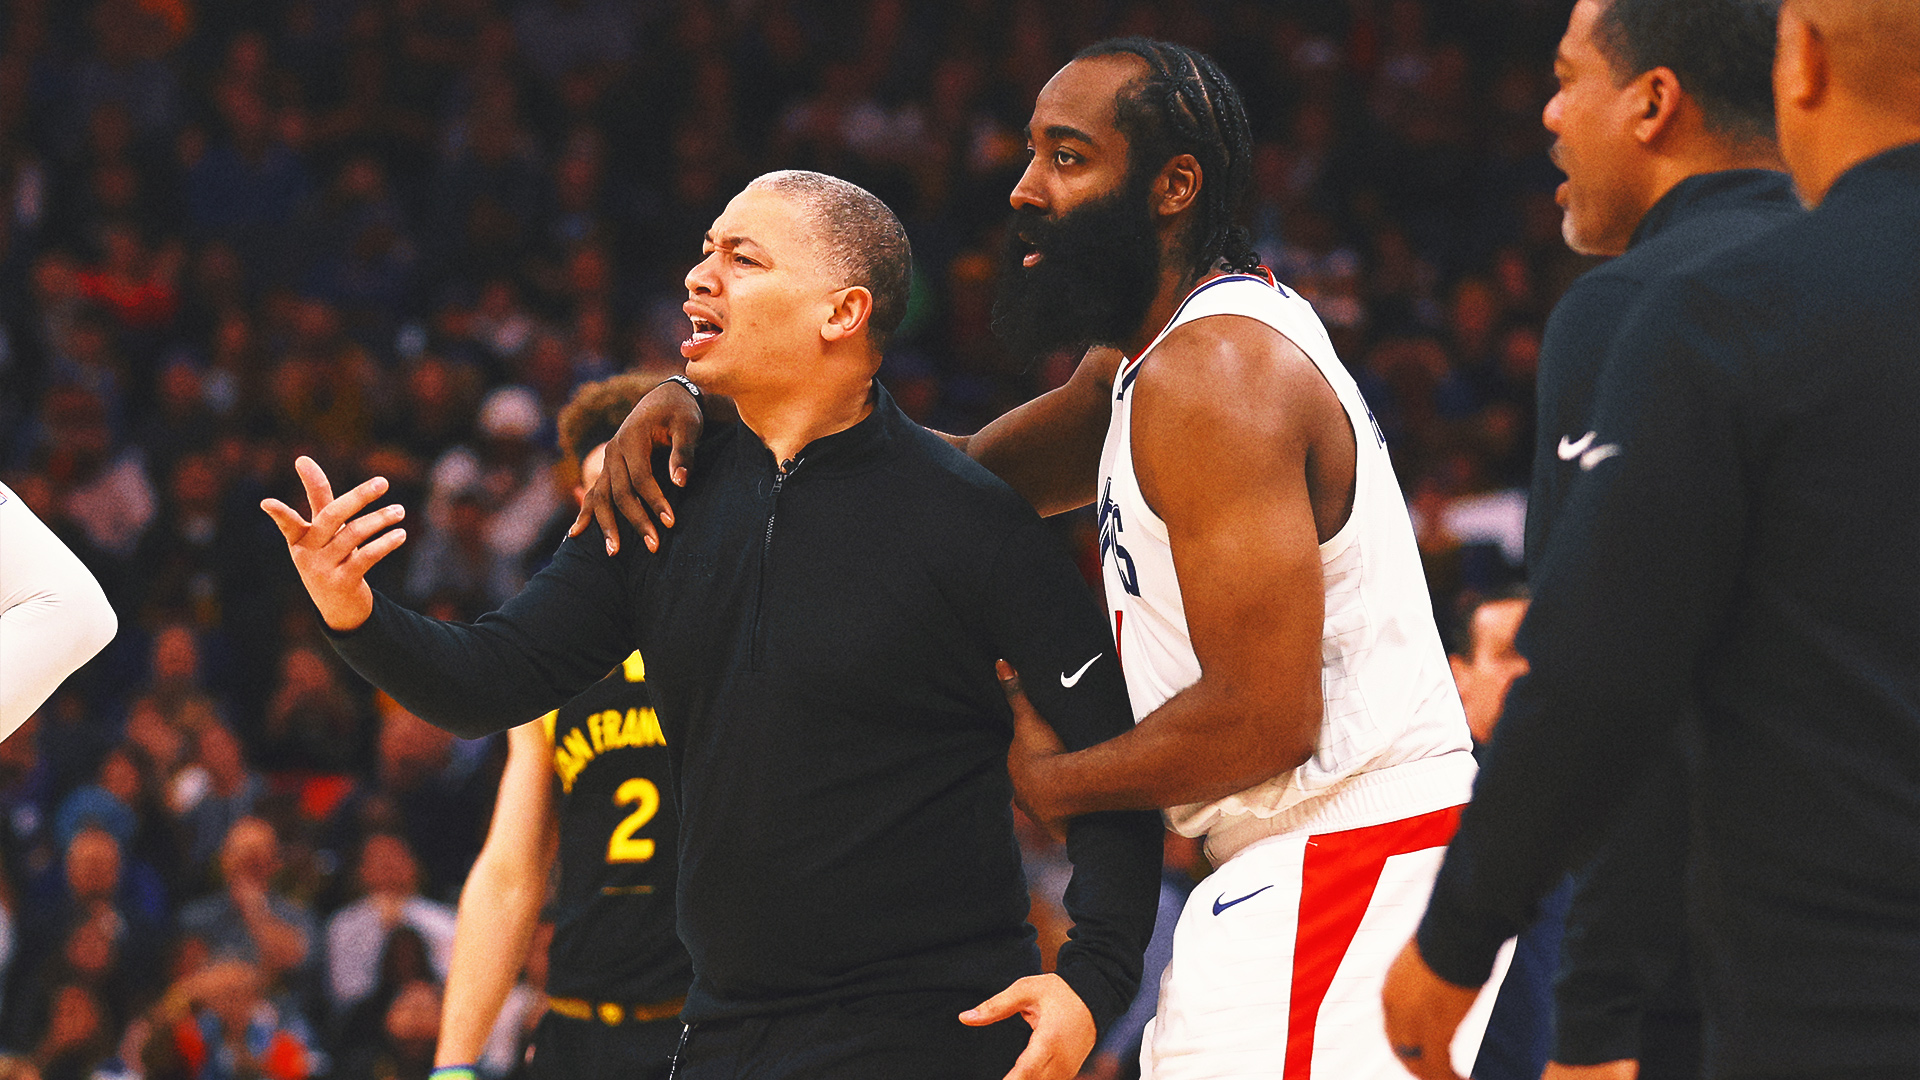 Clippers coach Tyronn Lue fined $35,000 for saying officials at Golden State were 'cheating'